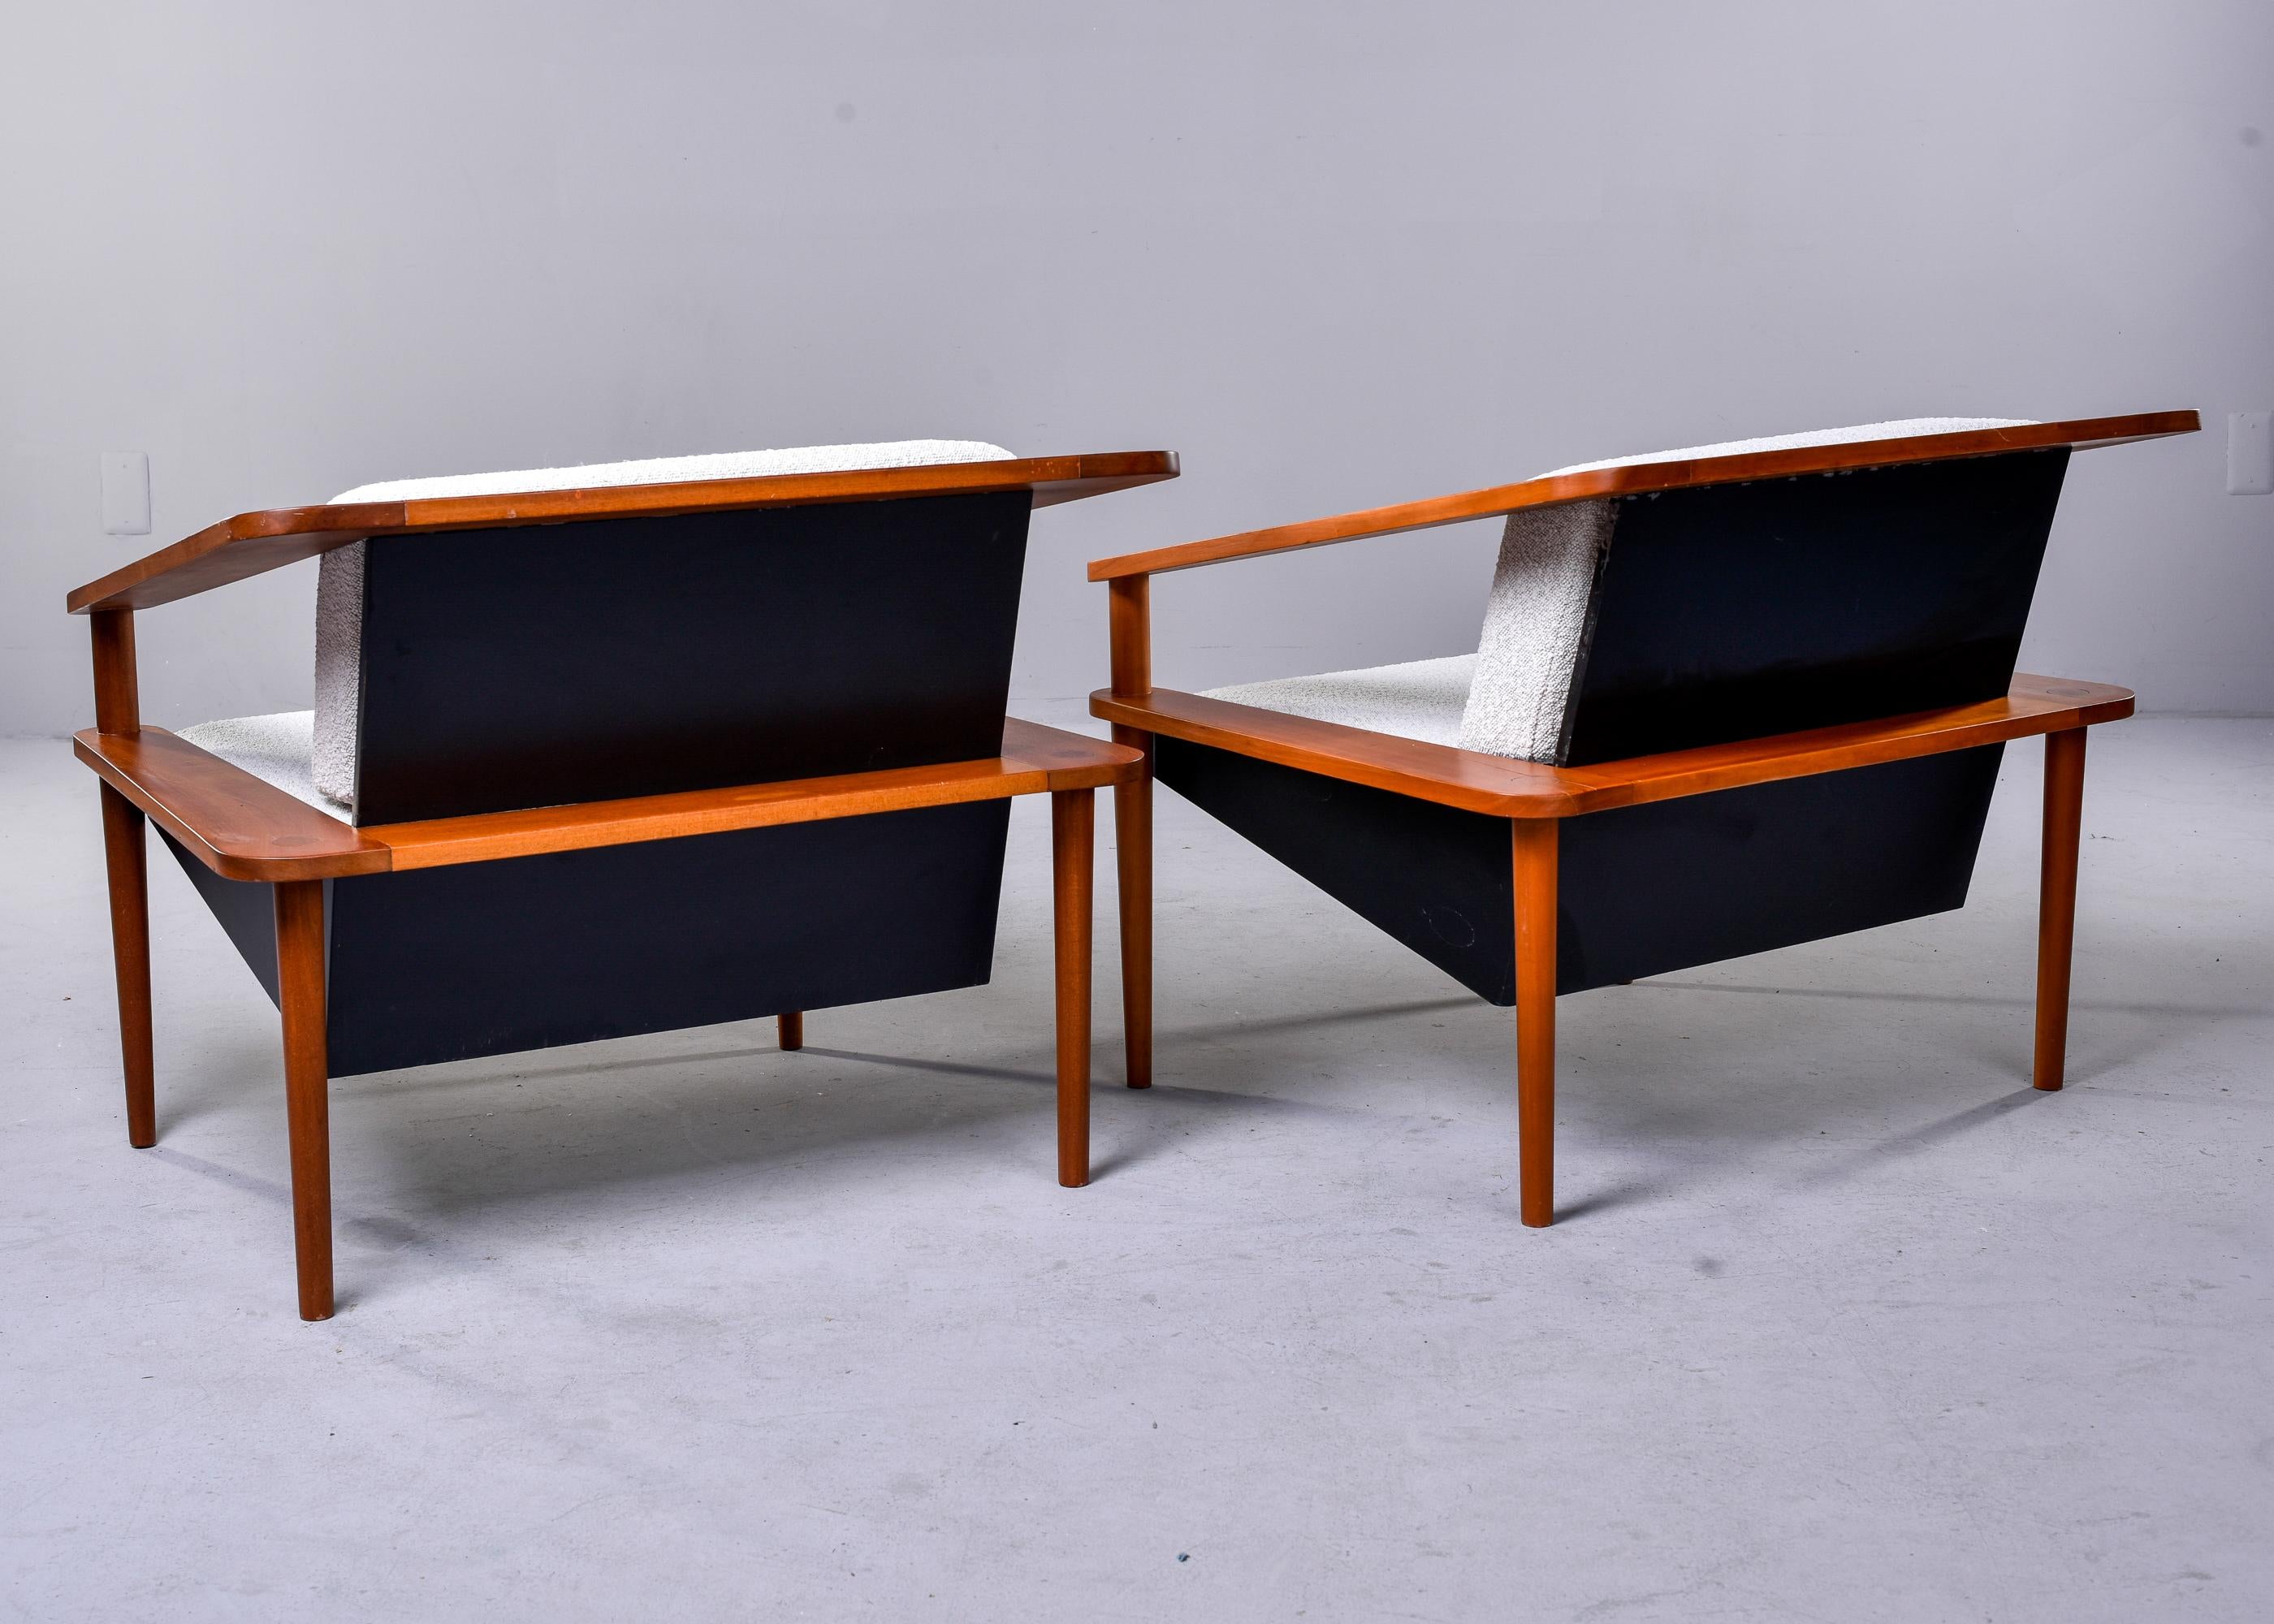 Upholstery Pair Unusual Mid Century Sculptural Cube Chairs with Teak Frames